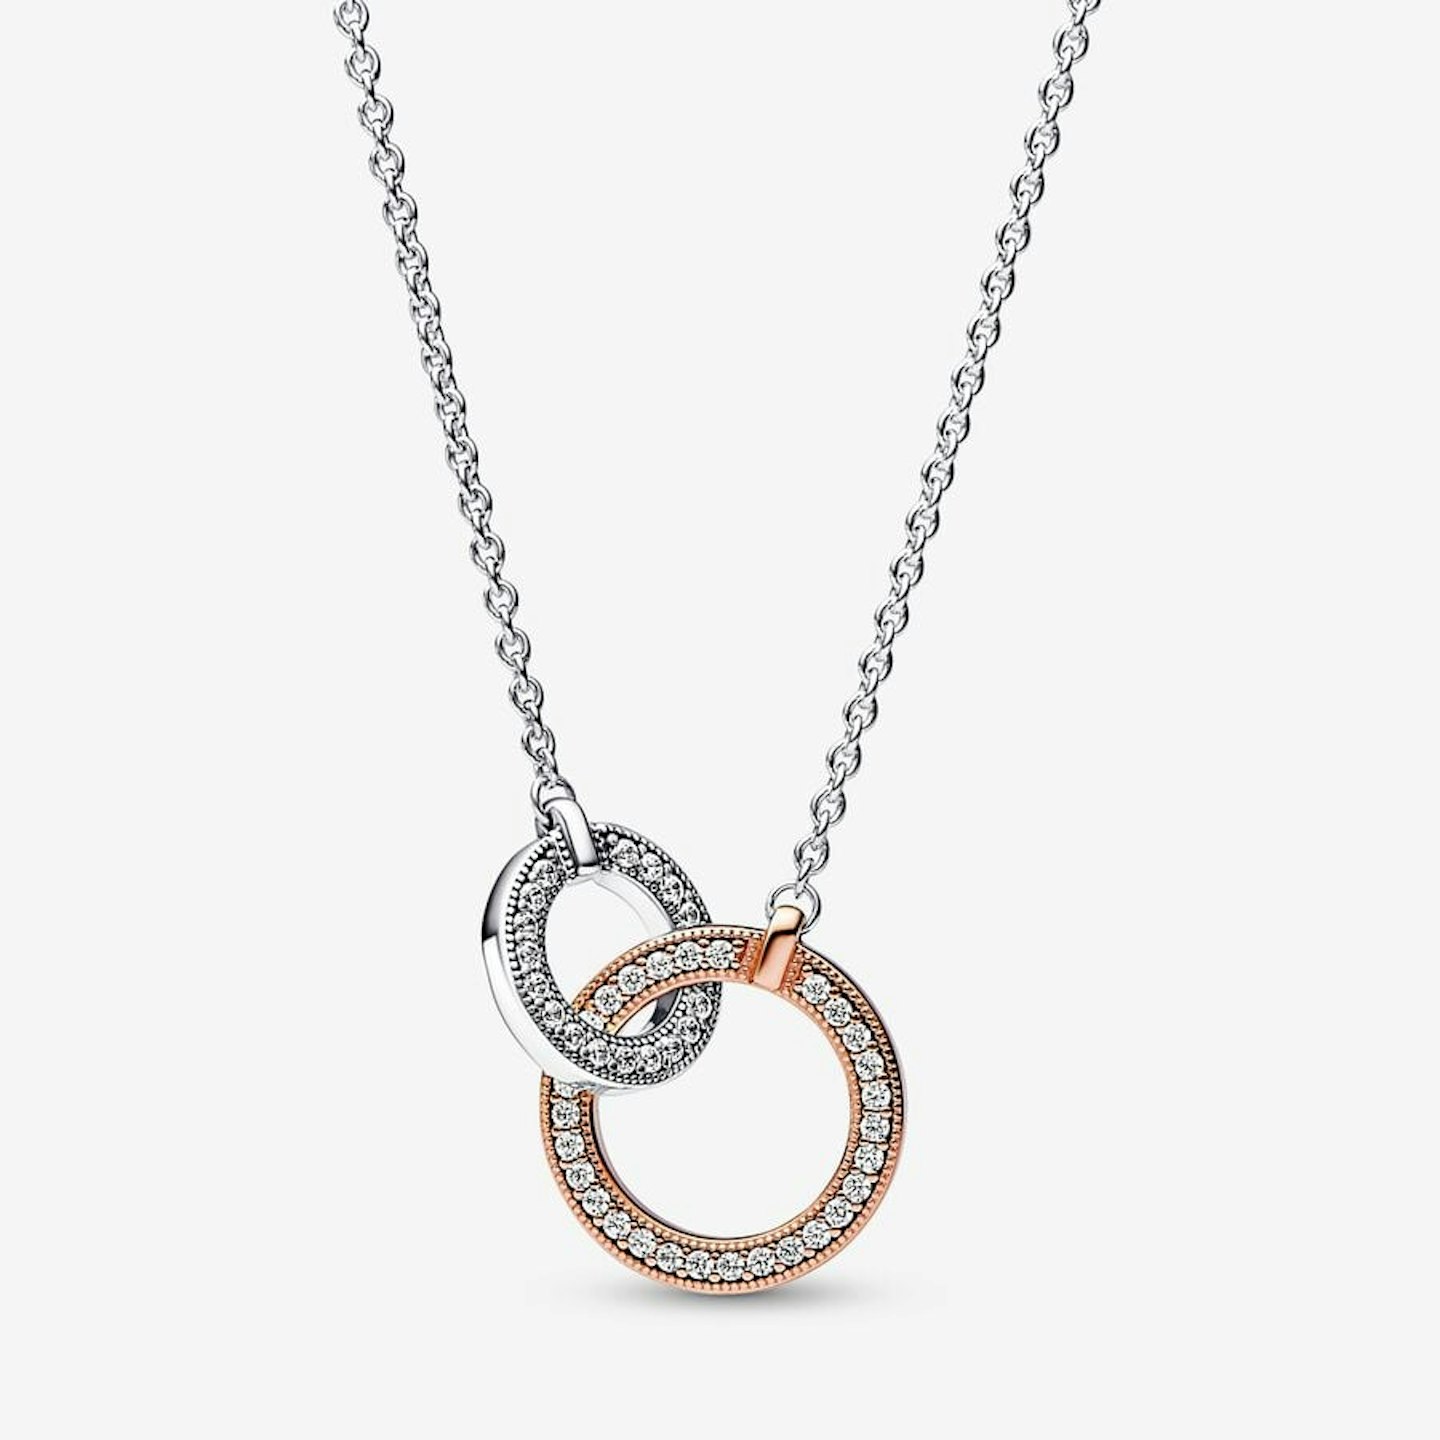 Signature Intertwined Rings Necklace